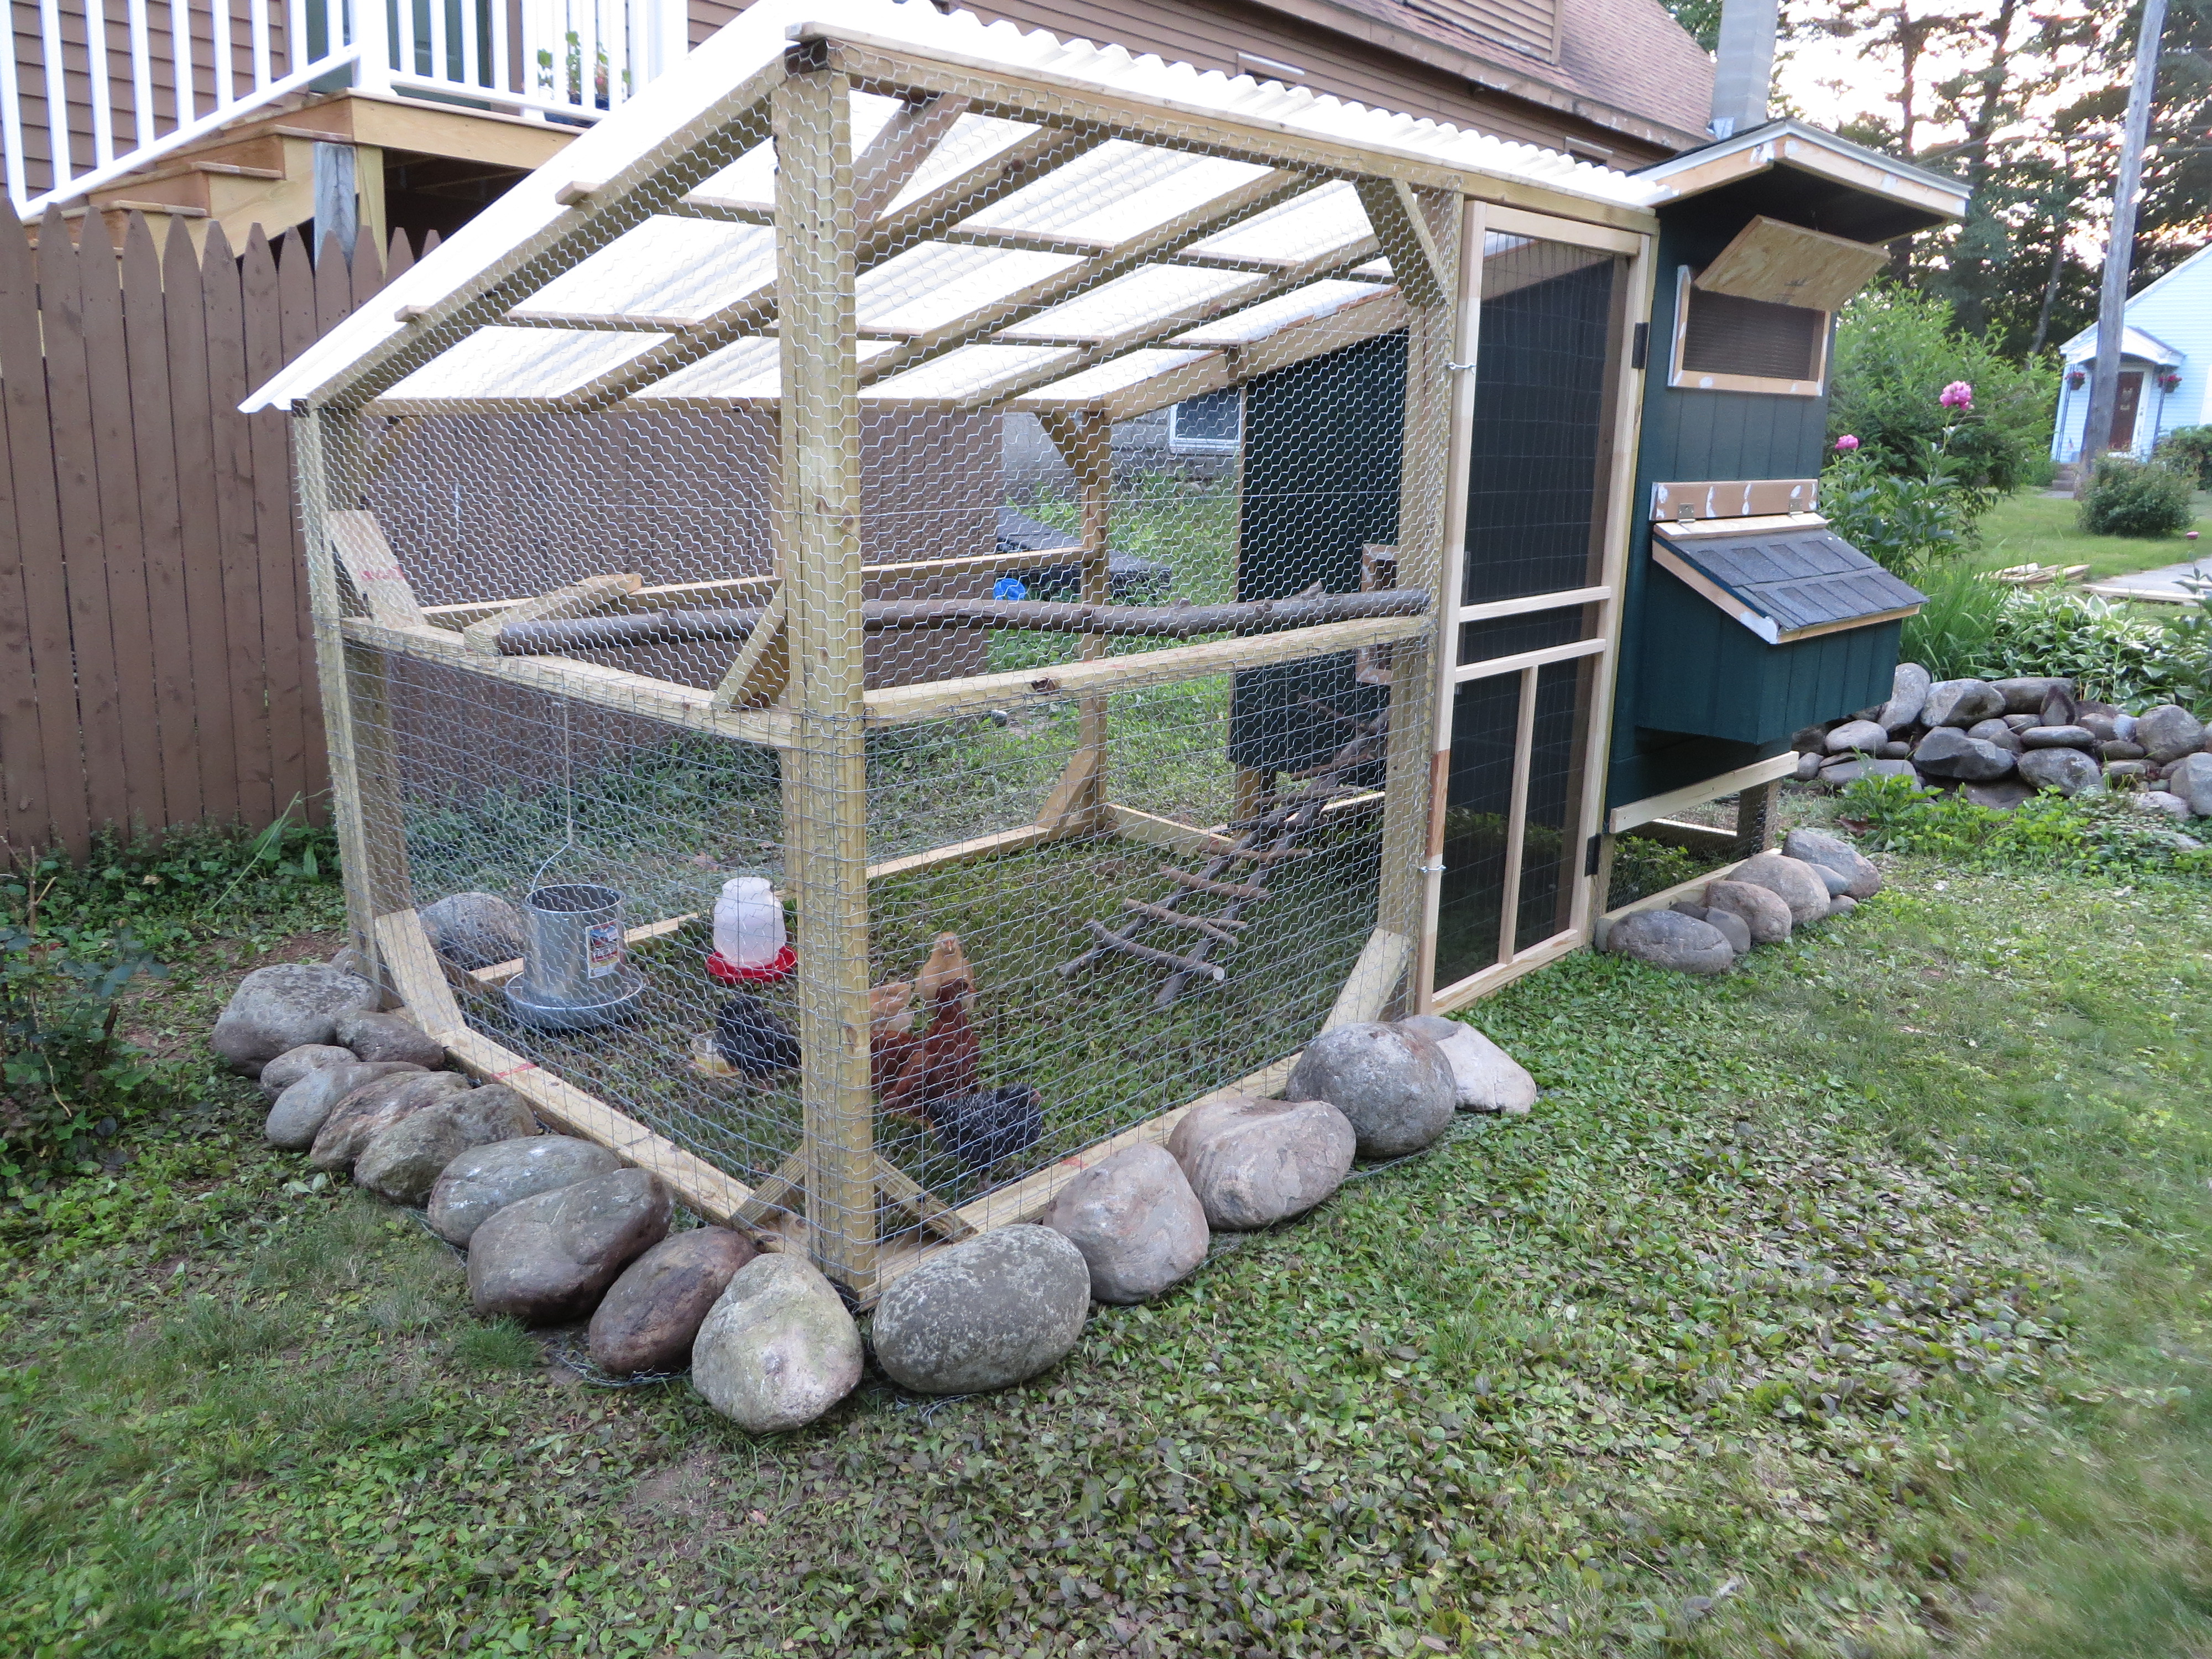 The door to the run is a pre-made screen door that I bought for $20 and cut about 10" off the top to fit the run. I also added 2"x3" wire to the door. The run is fully covered with chicken wire, including a 1' wide apron under the stones. The lower half of the run also has 2"x3" fencing. The roof of the run us white corrugated plastic roofing panels.